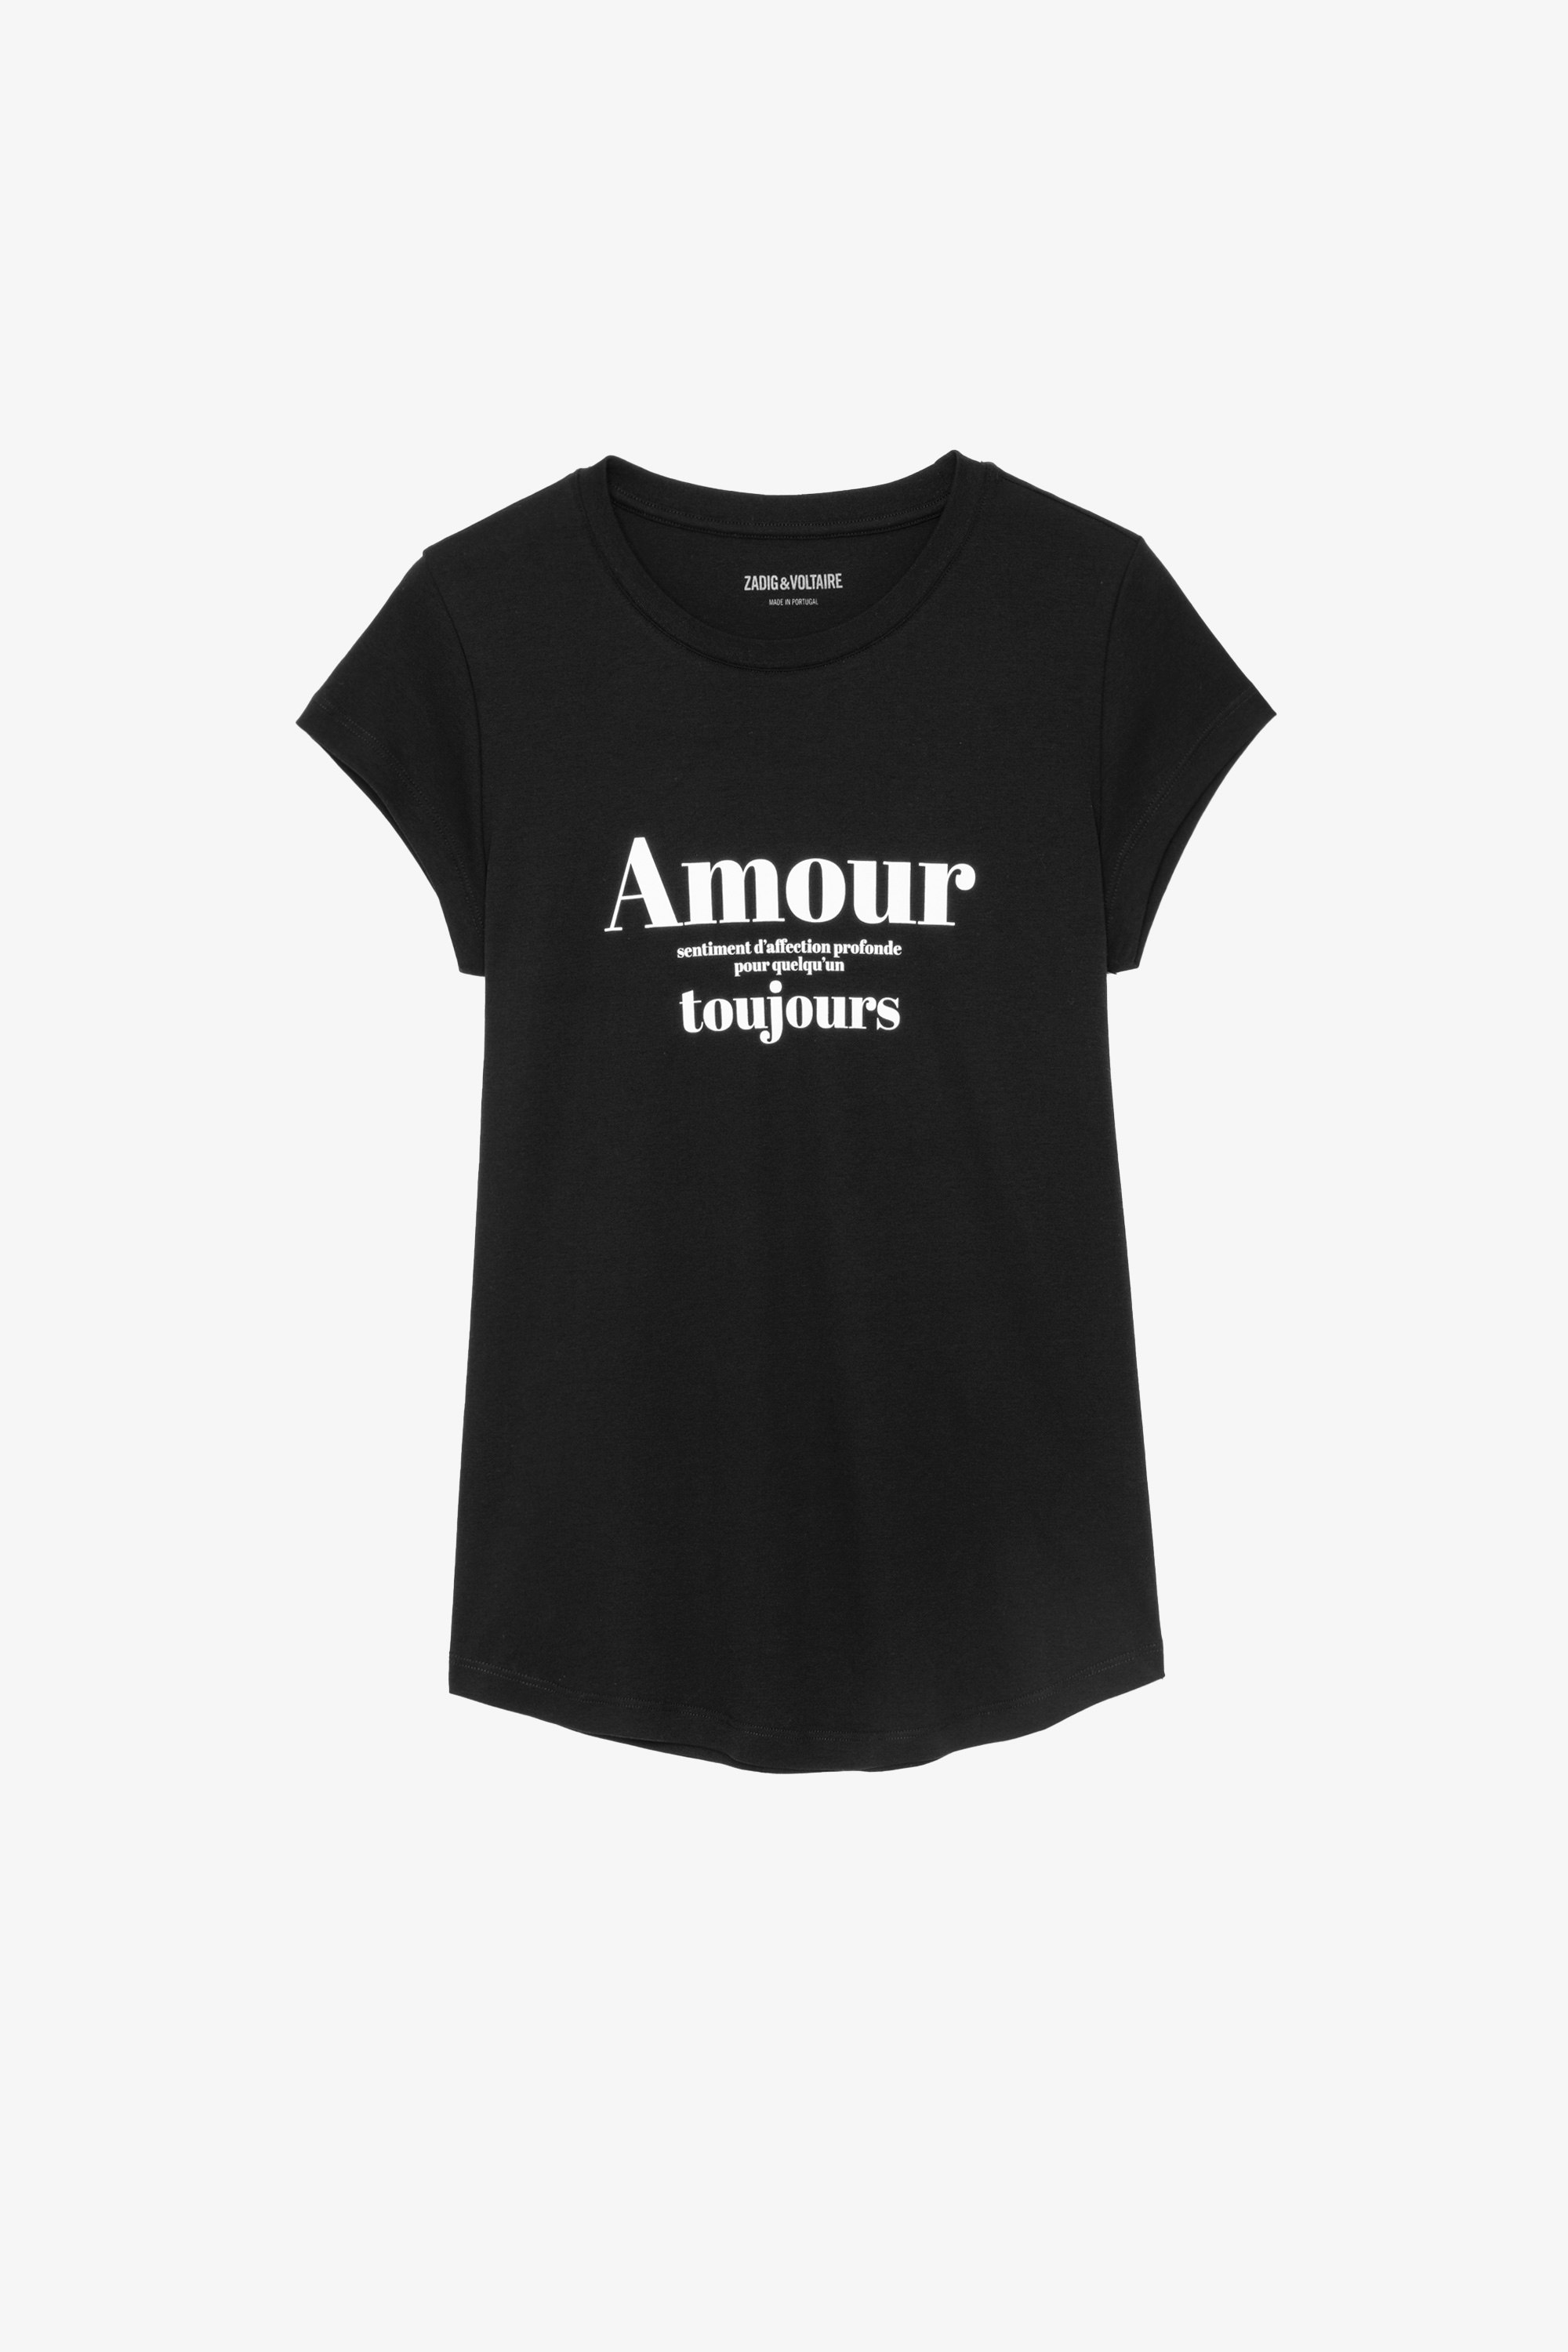 Skinny Amour Toujours T-shirt - Women’s black cotton T-shirt with contrasting “Amour Toujours” print